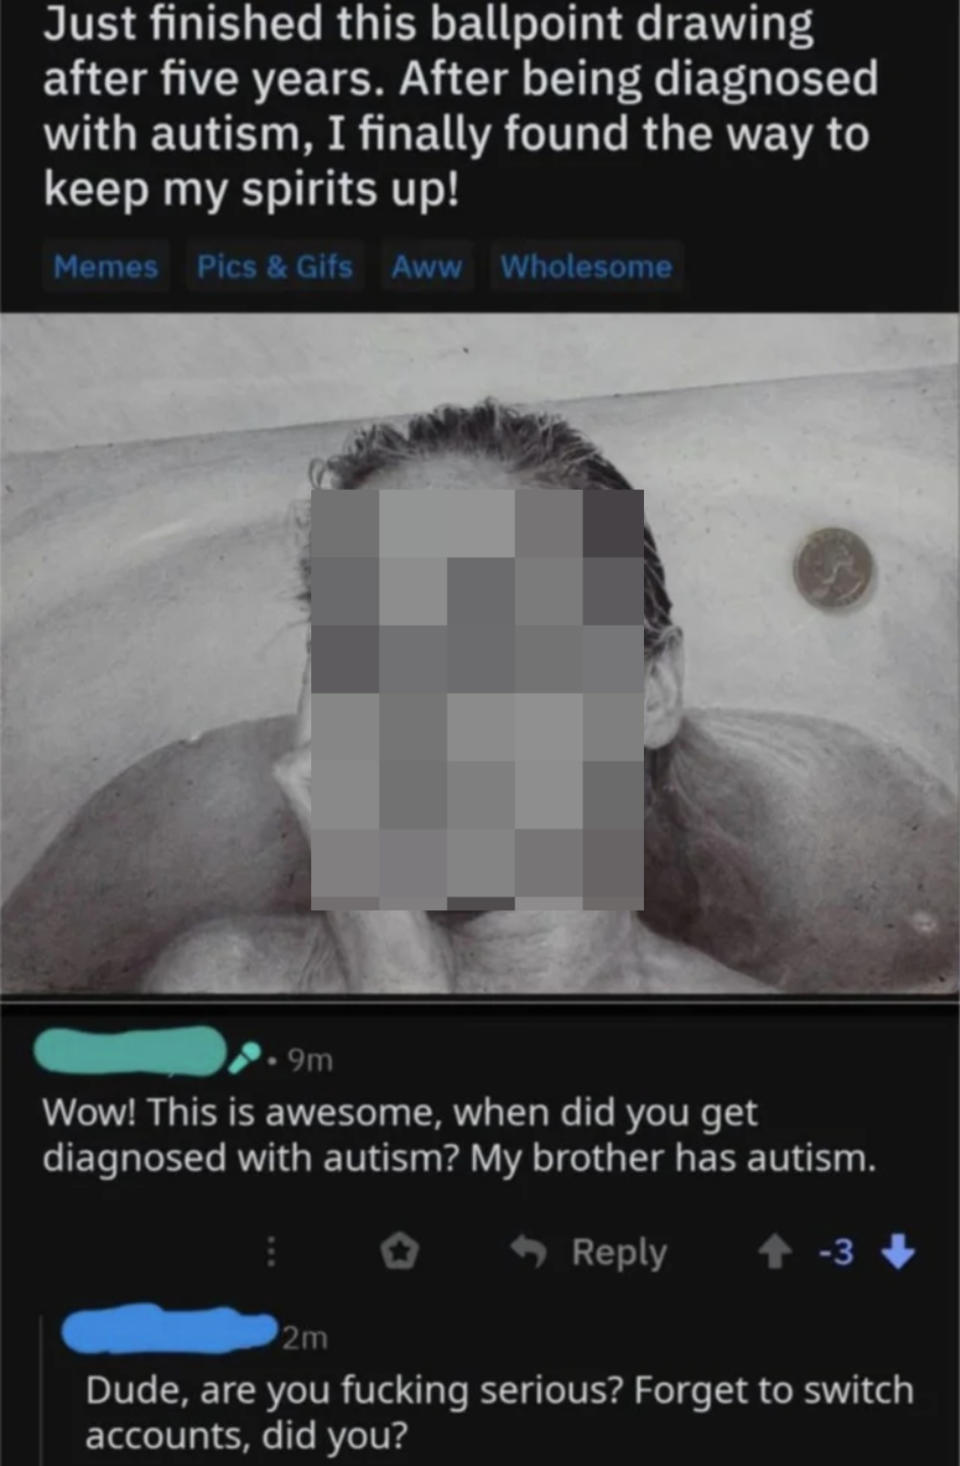 Social media thread of a person claiming to have autism and drawing a picture, with someone saying, "Dude, are you fucking serious? Forget to switch accounts, did you?"